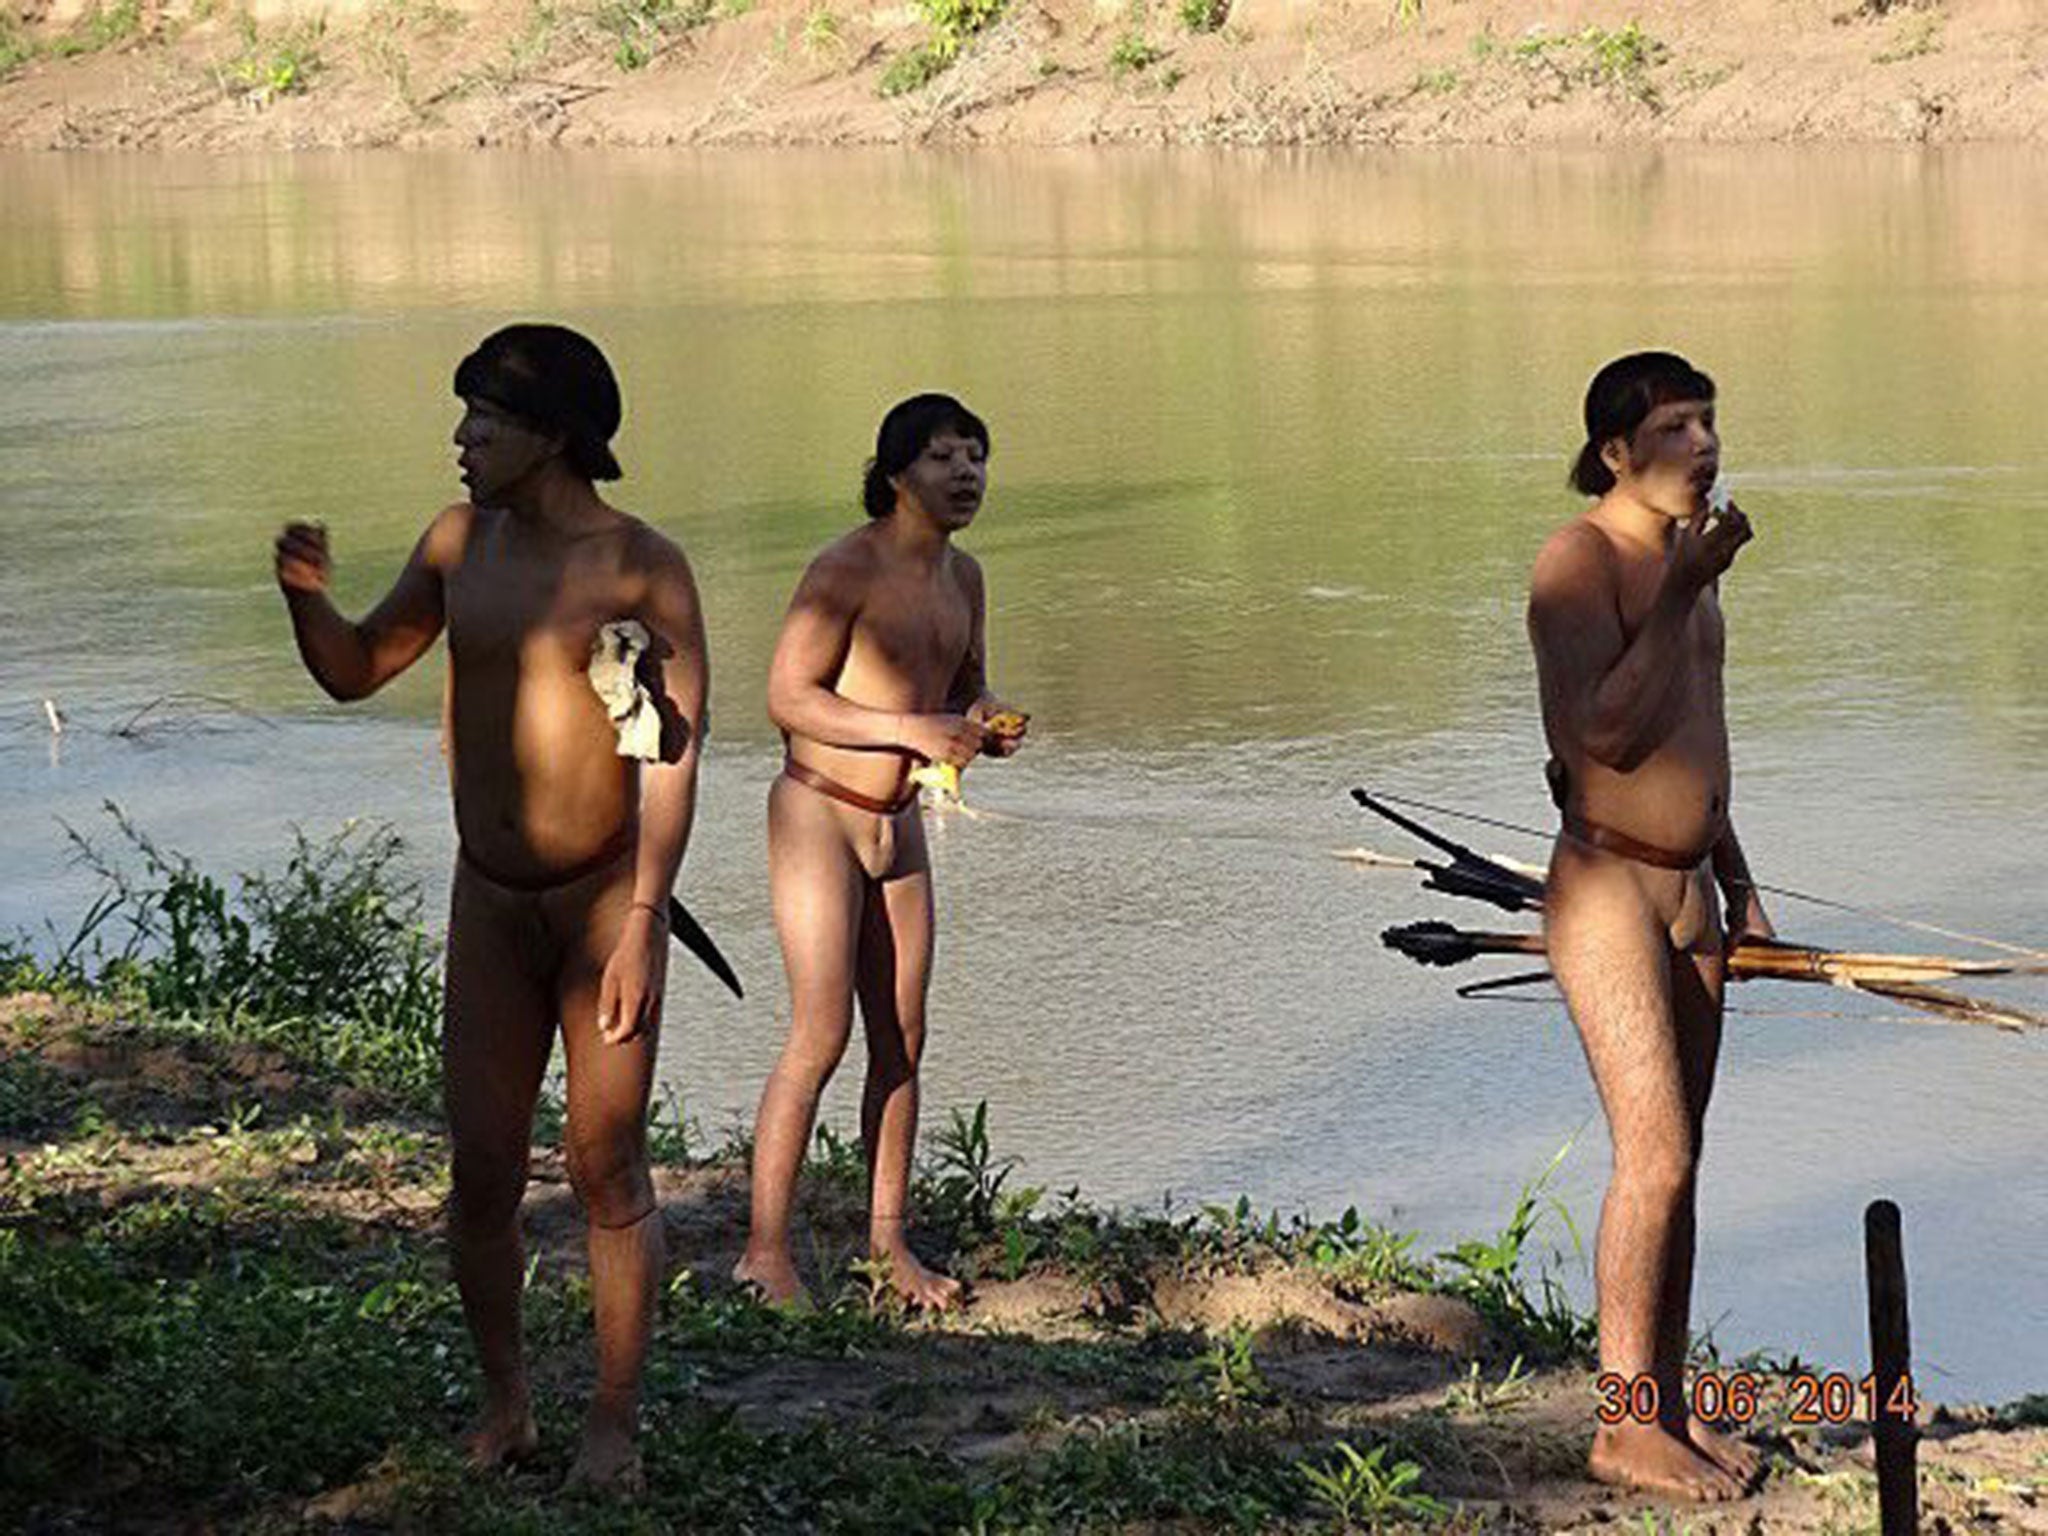 Indigenous people from a previously uncontacted tribe are filmed at Alto Envira, Acre State, by Brazil’s National
Indian Foundation